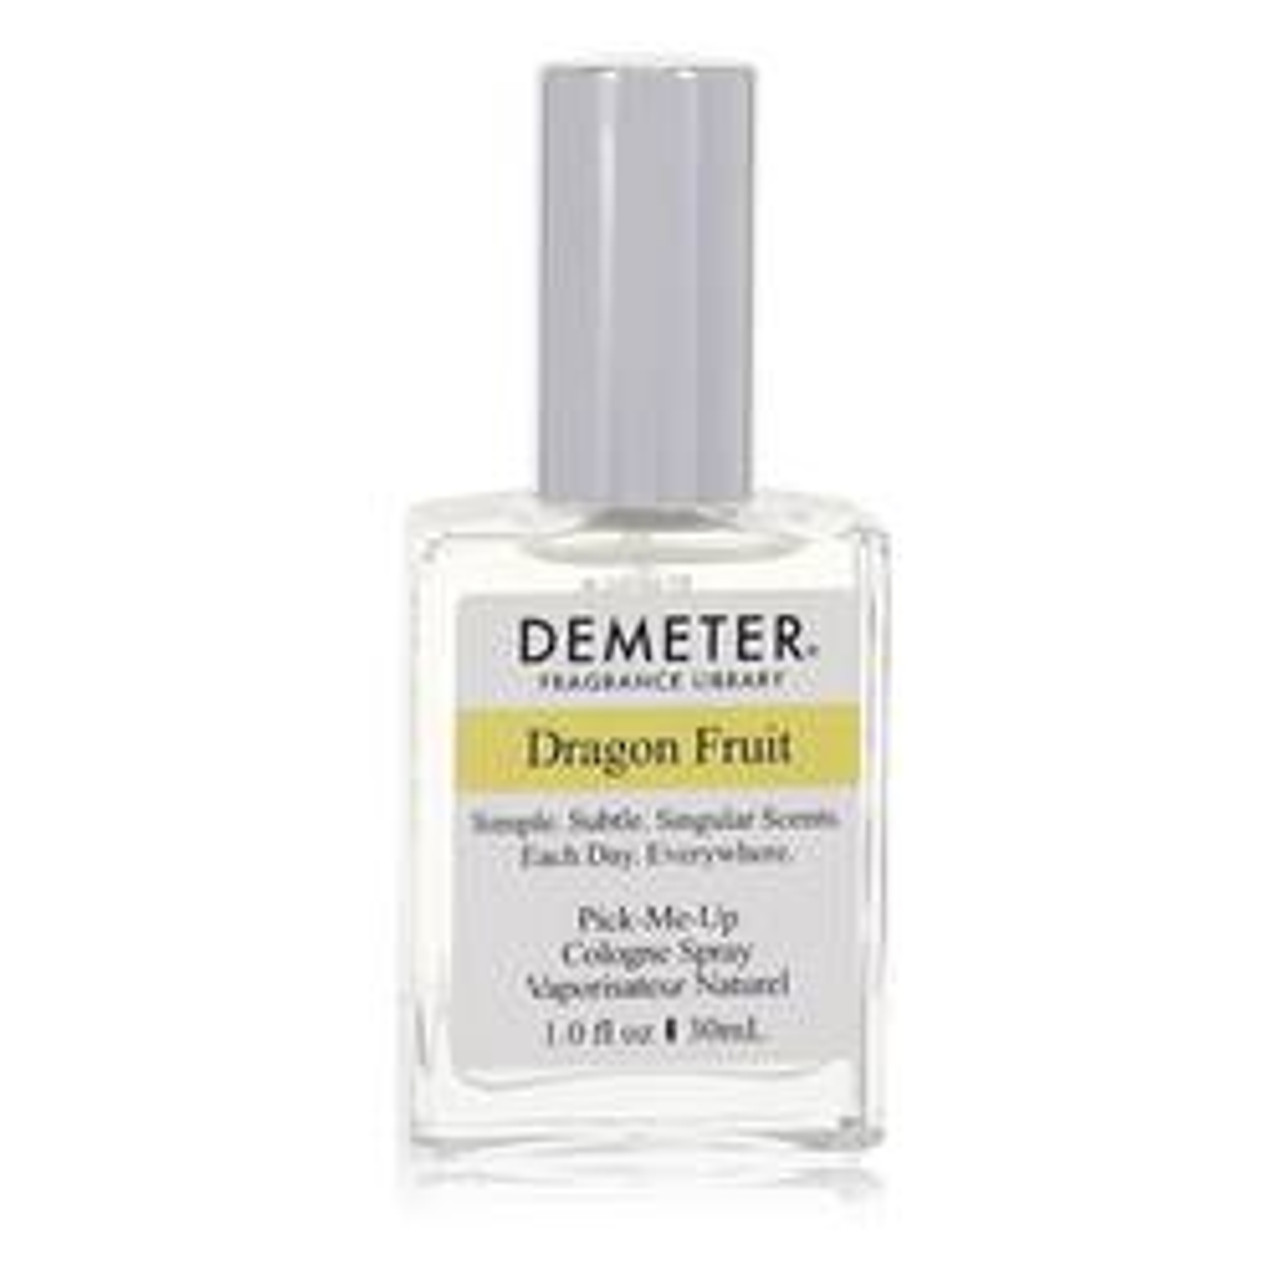 Demeter Dragon Fruit Perfume By Demeter Cologne Spray (unboxed) 1 oz for Women - [From 55.00 - Choose pk Qty ] - *Ships from Miami